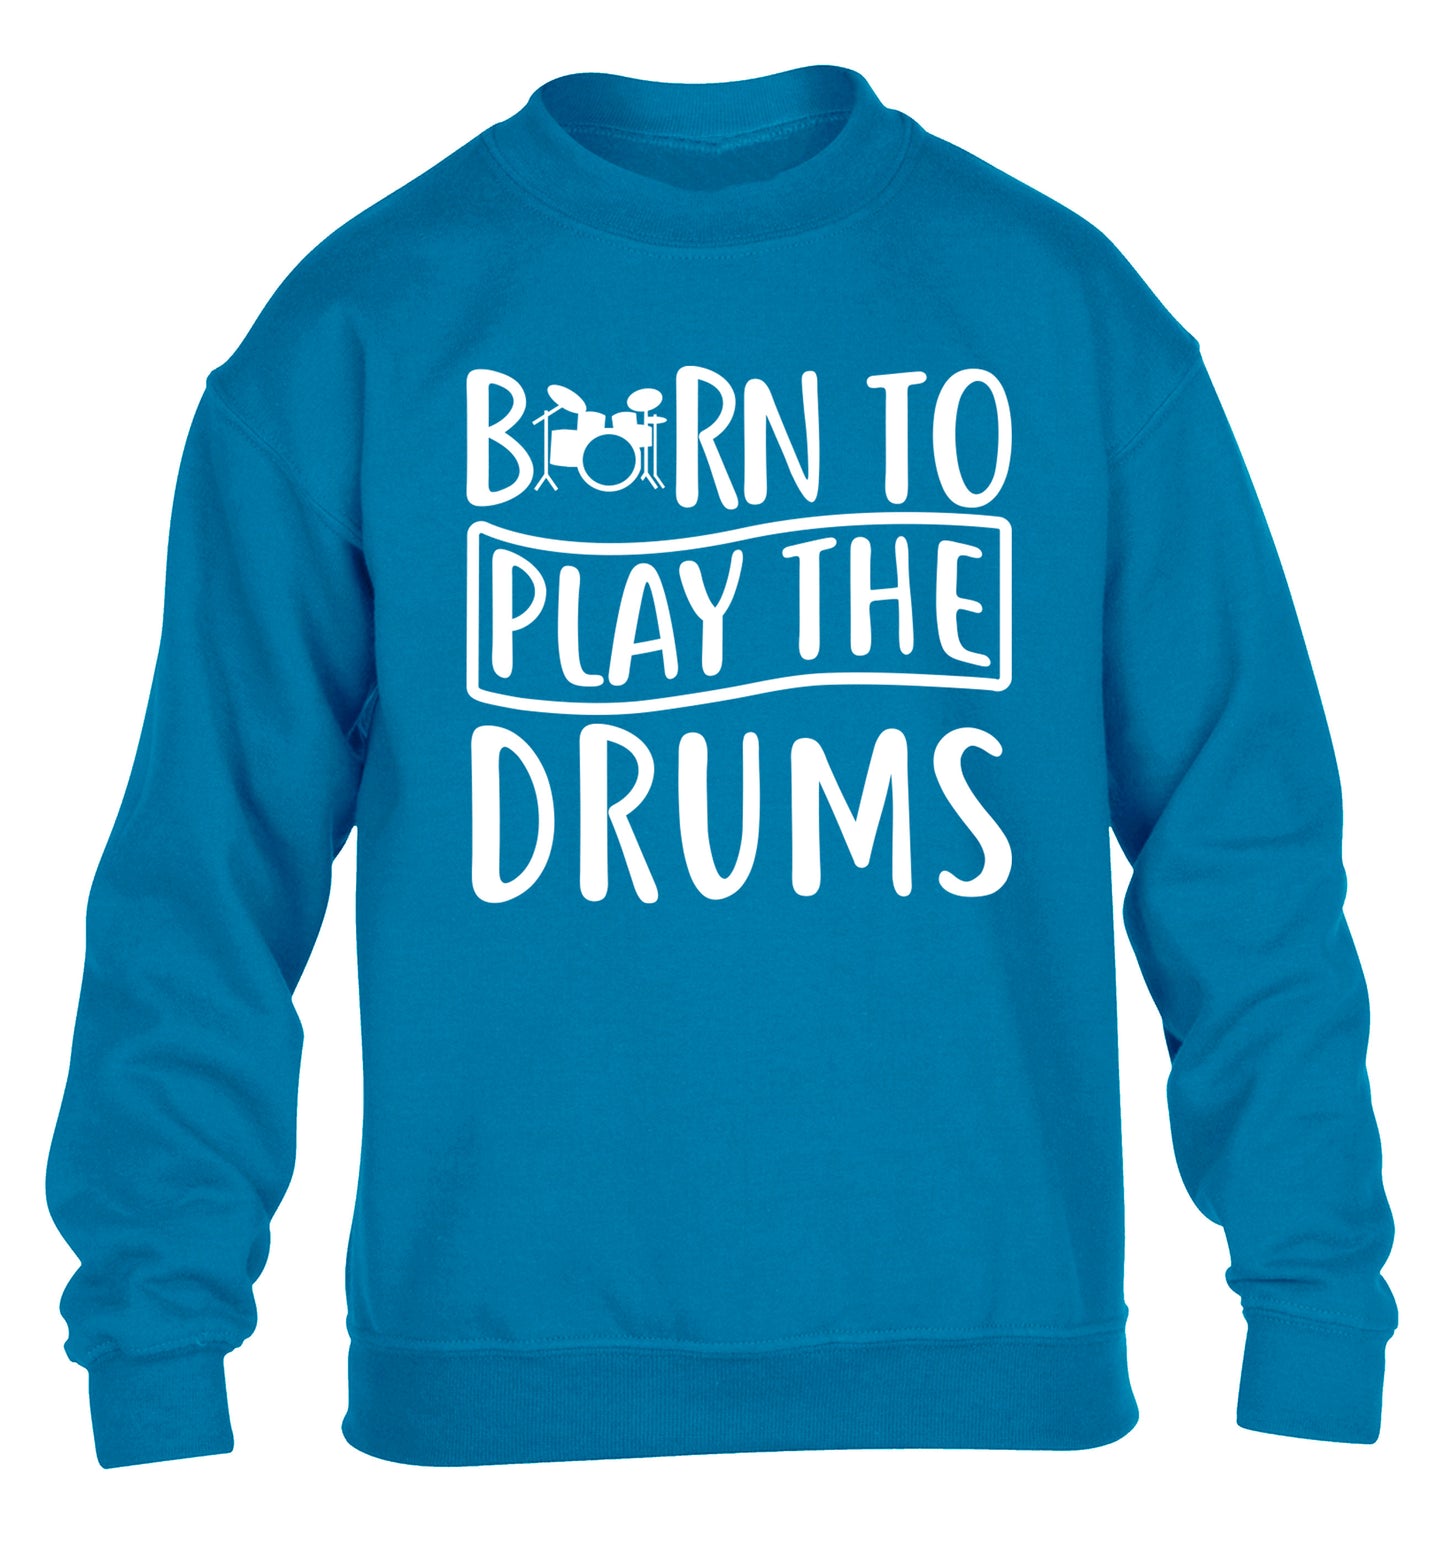 Born to play the drums children's blue sweater 12-14 Years